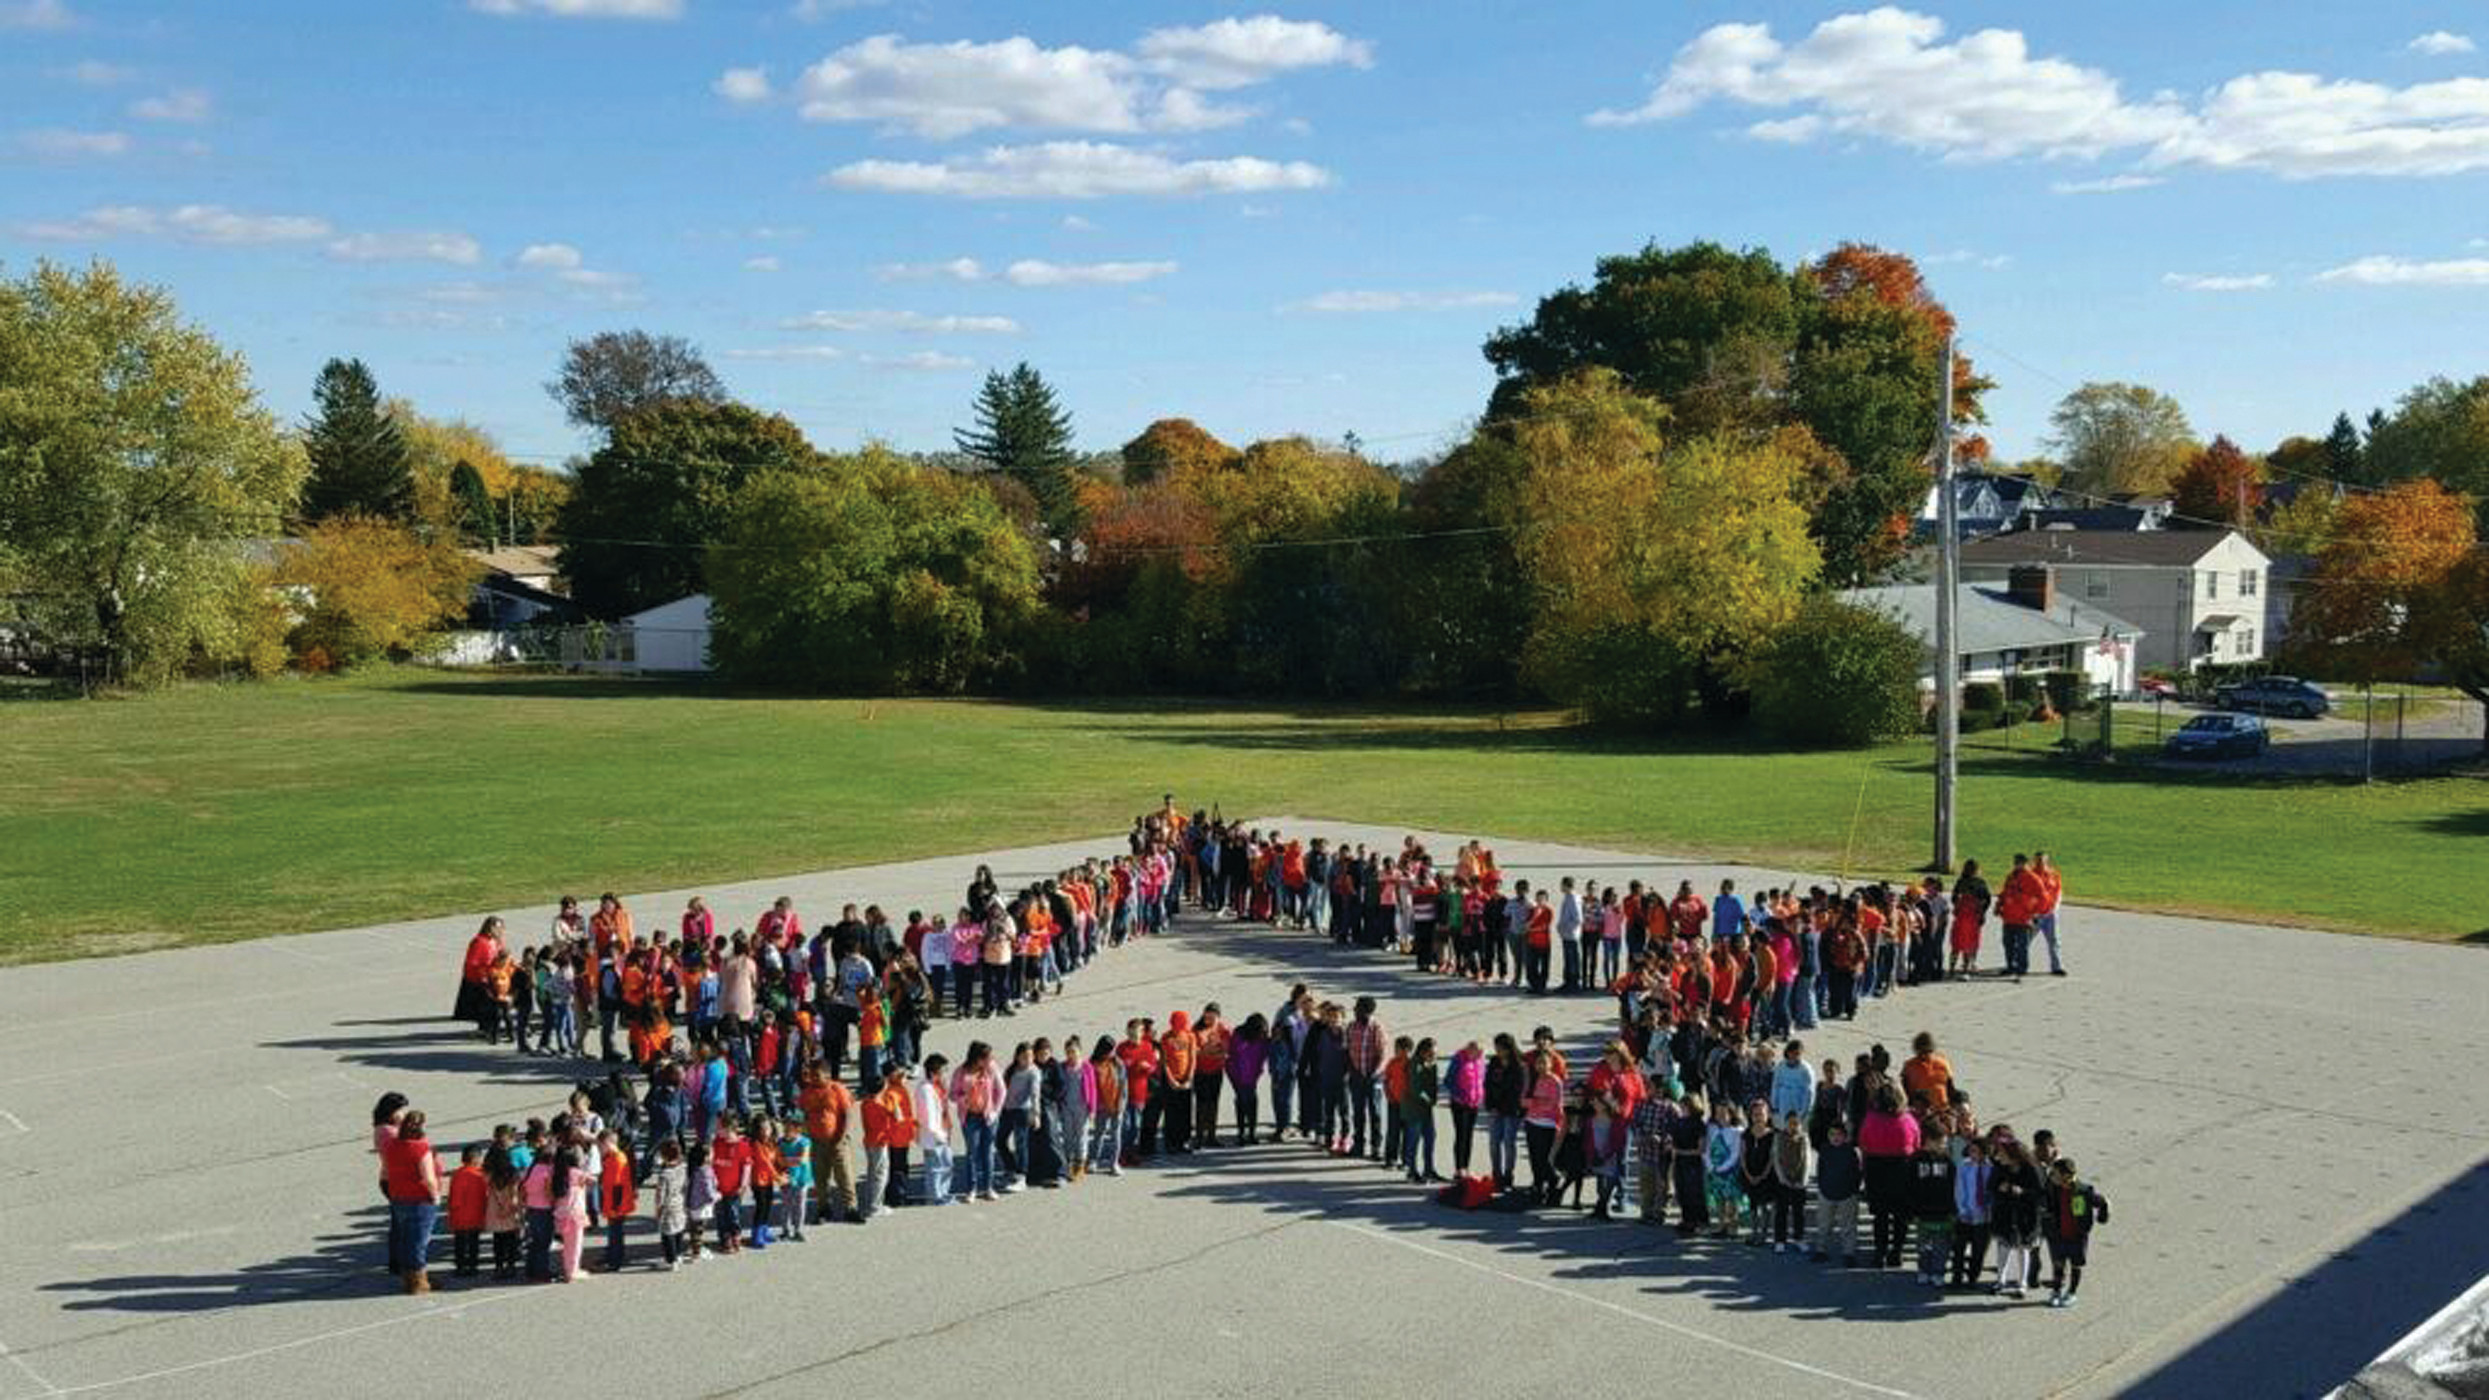 ‘ORANGE’ SPIRIT SHINES: Schools across the city recently took part in the “Go Orange” drive to collect funds and food for the No Hungry Kid campaign. Above, Arlington Elementary School students showed their “Go Orange” spirit on Oct. 30 by forming a giant star on the blacktop outside the school.